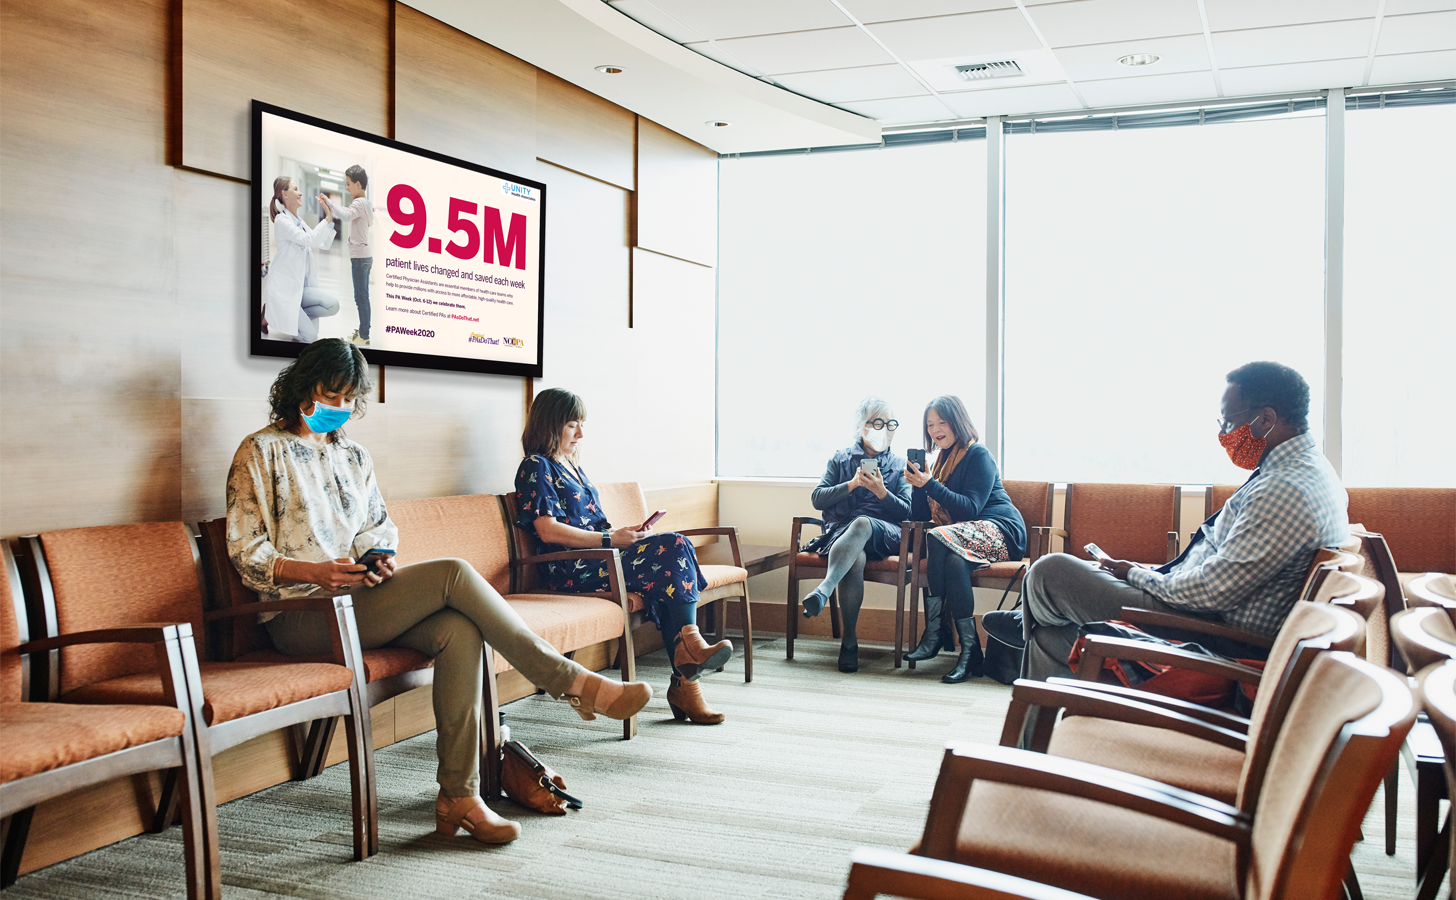 A group of patients sit in a waiting room featuring a digital screen with content celebrating physician assistants.